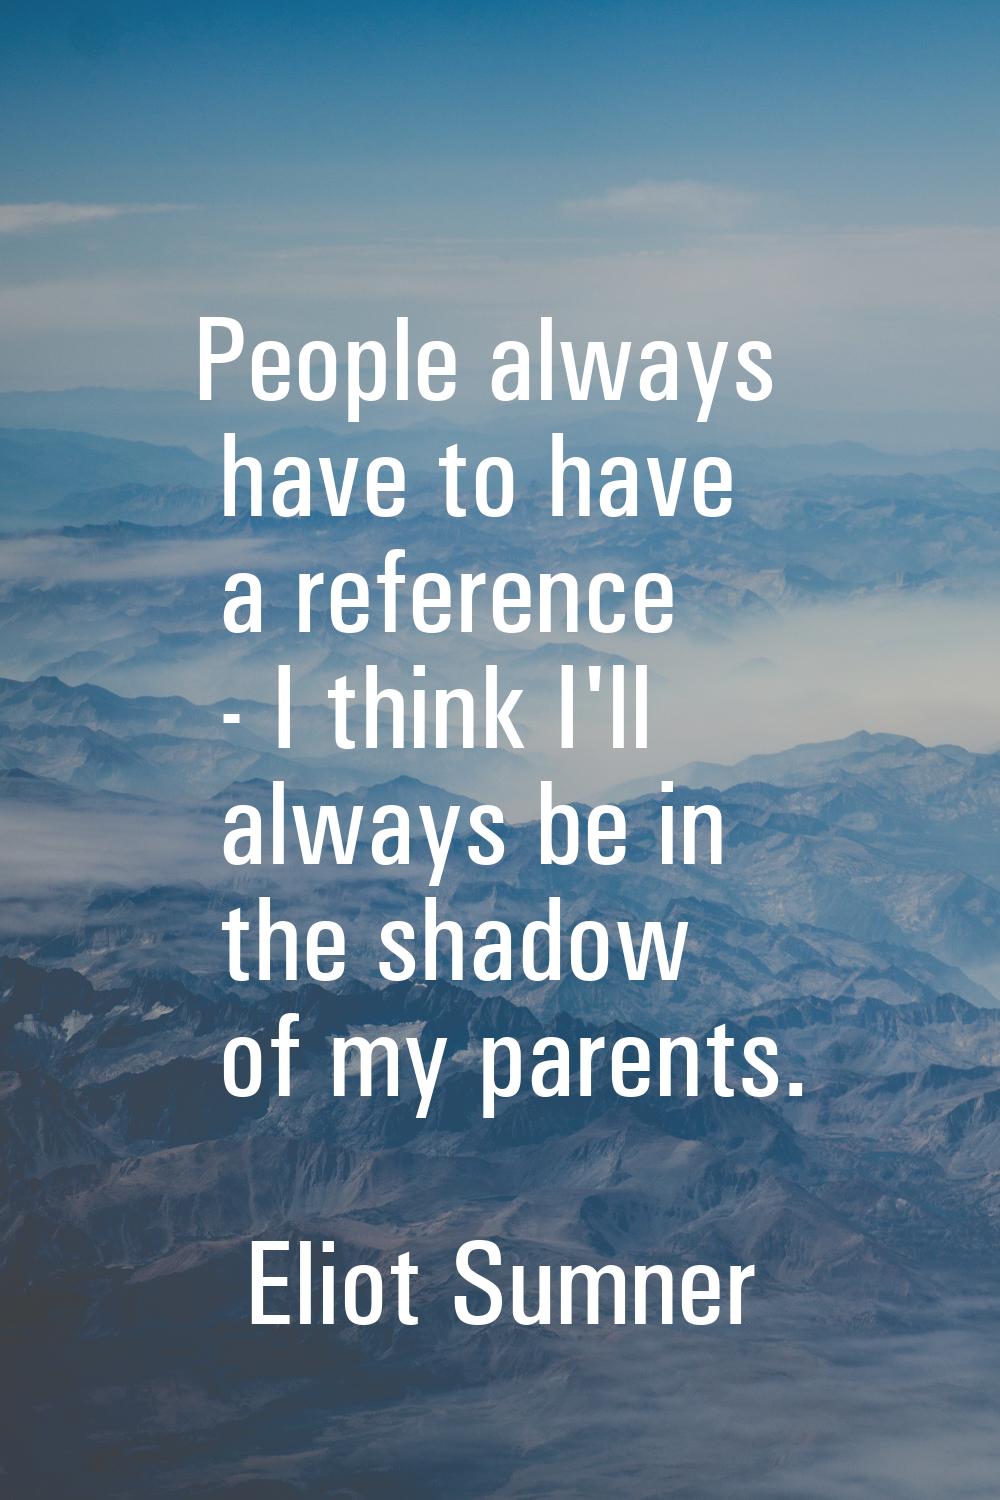 People always have to have a reference - I think I'll always be in the shadow of my parents.